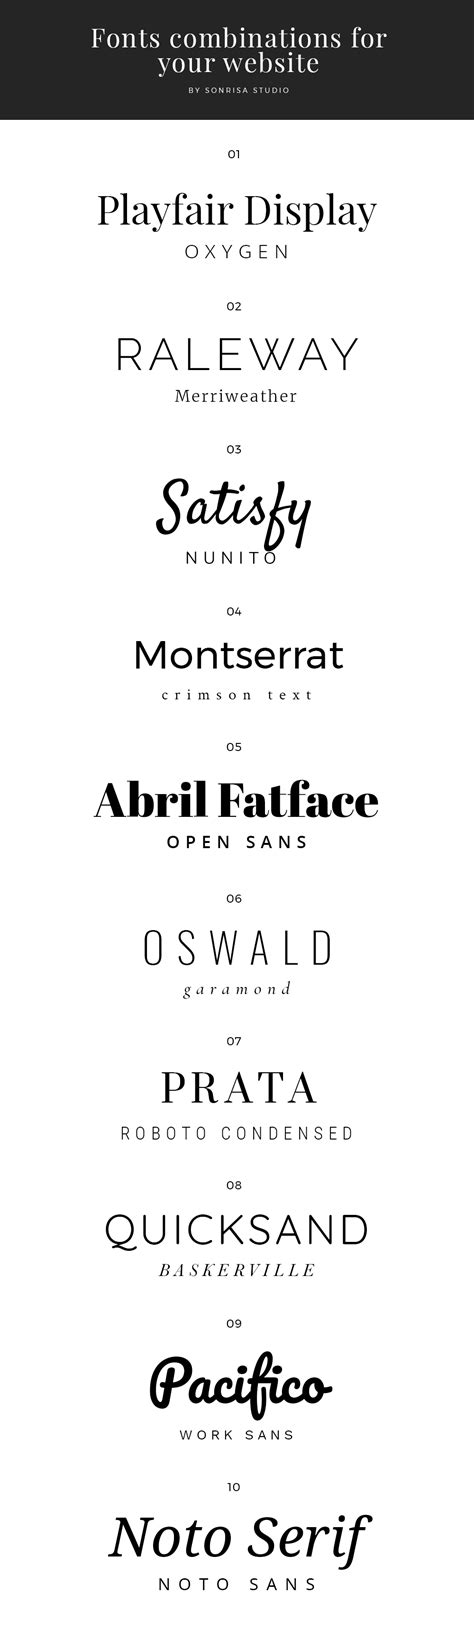 Font Combinations For Your Website